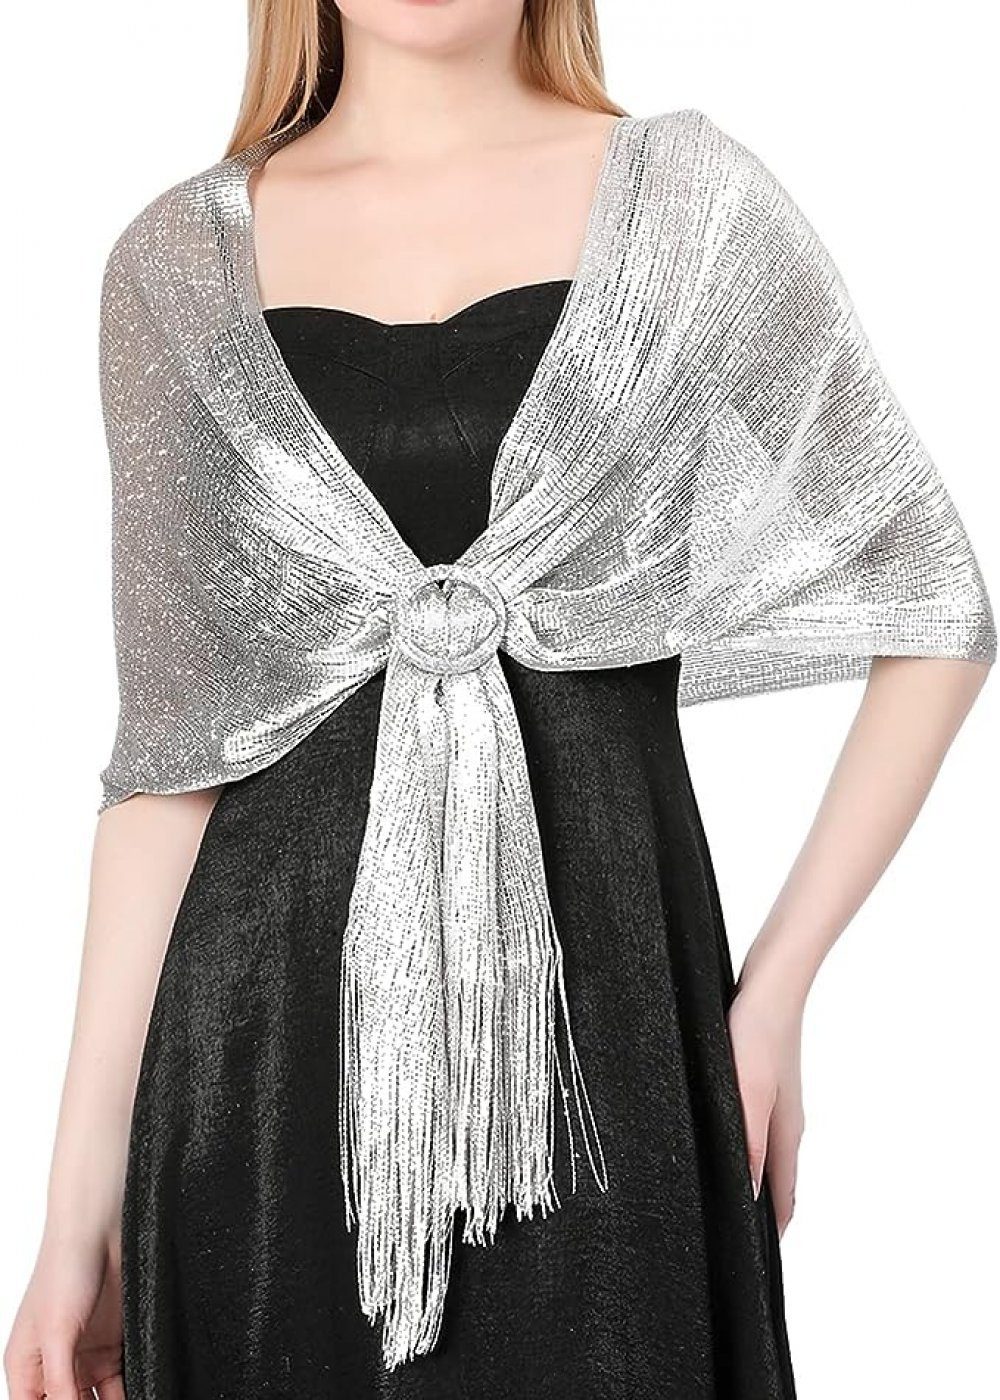 WaKuKa Schal Holiday metal buckle shawl suitable for sparkling evening parties silbrig | 